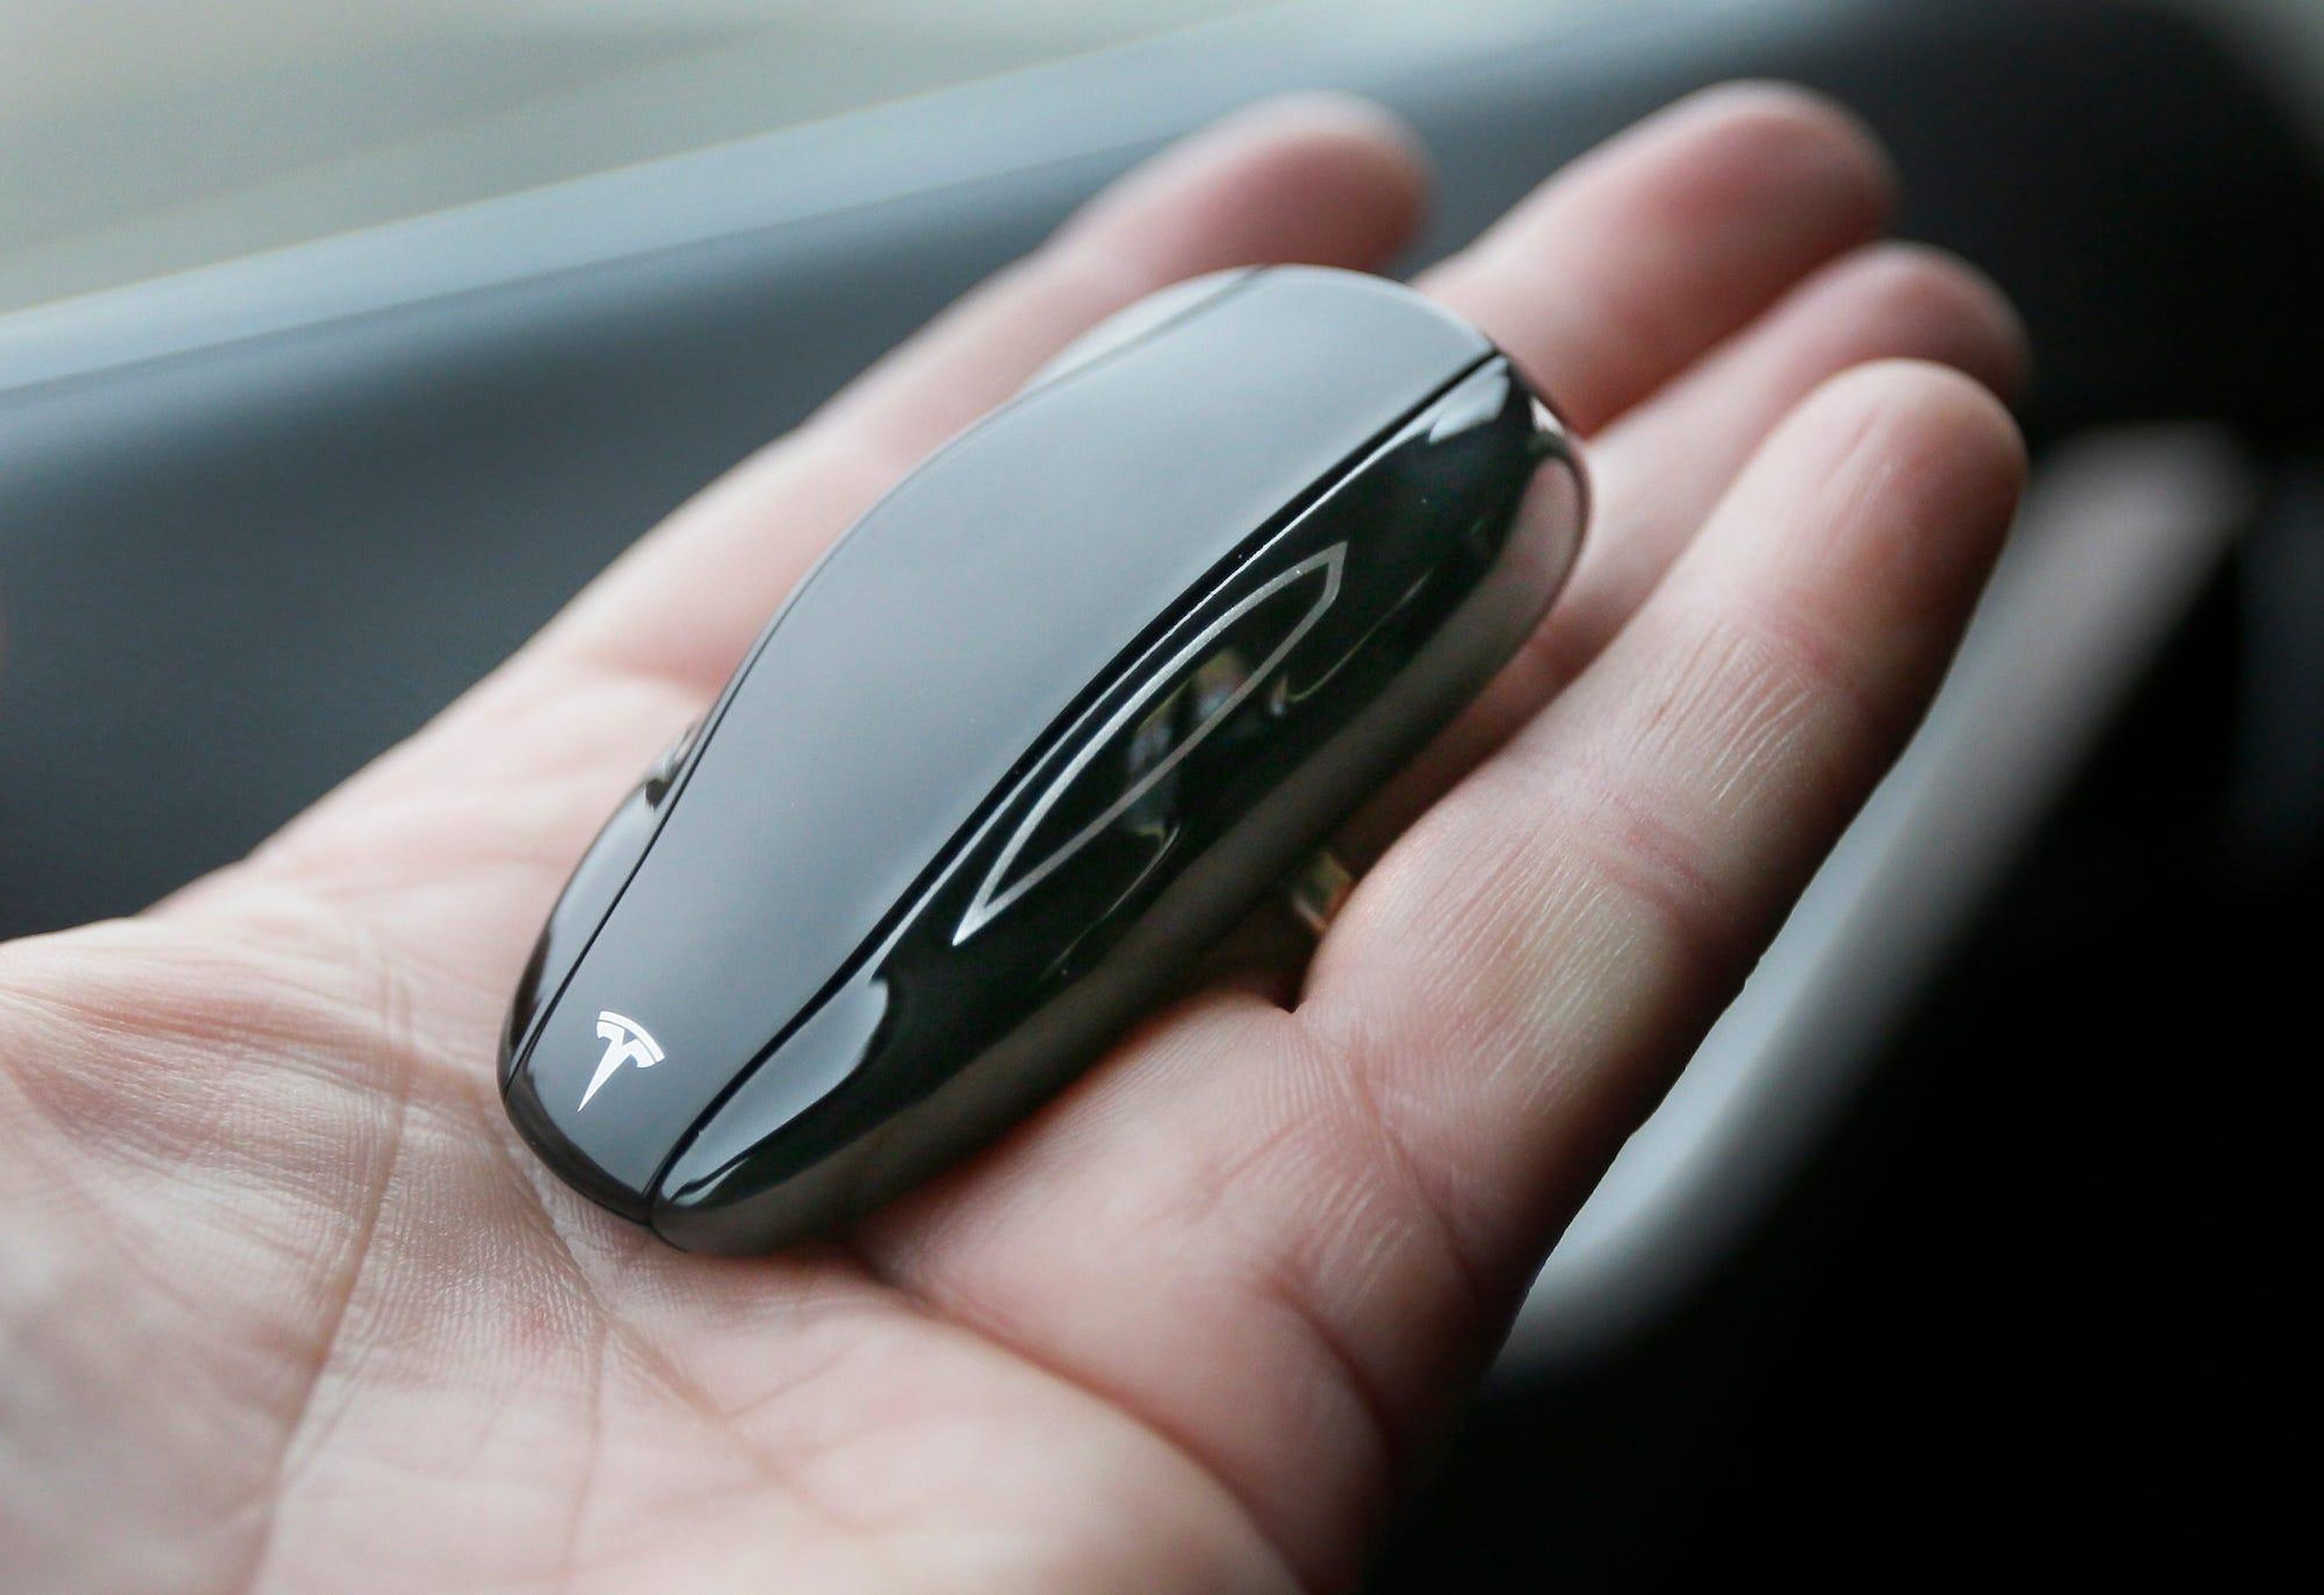 The Model S key fob is a sleek little guy that resembles the car. You can also use the Tesla app to control some features, monitor charging, and check on the Model S's vital signs.